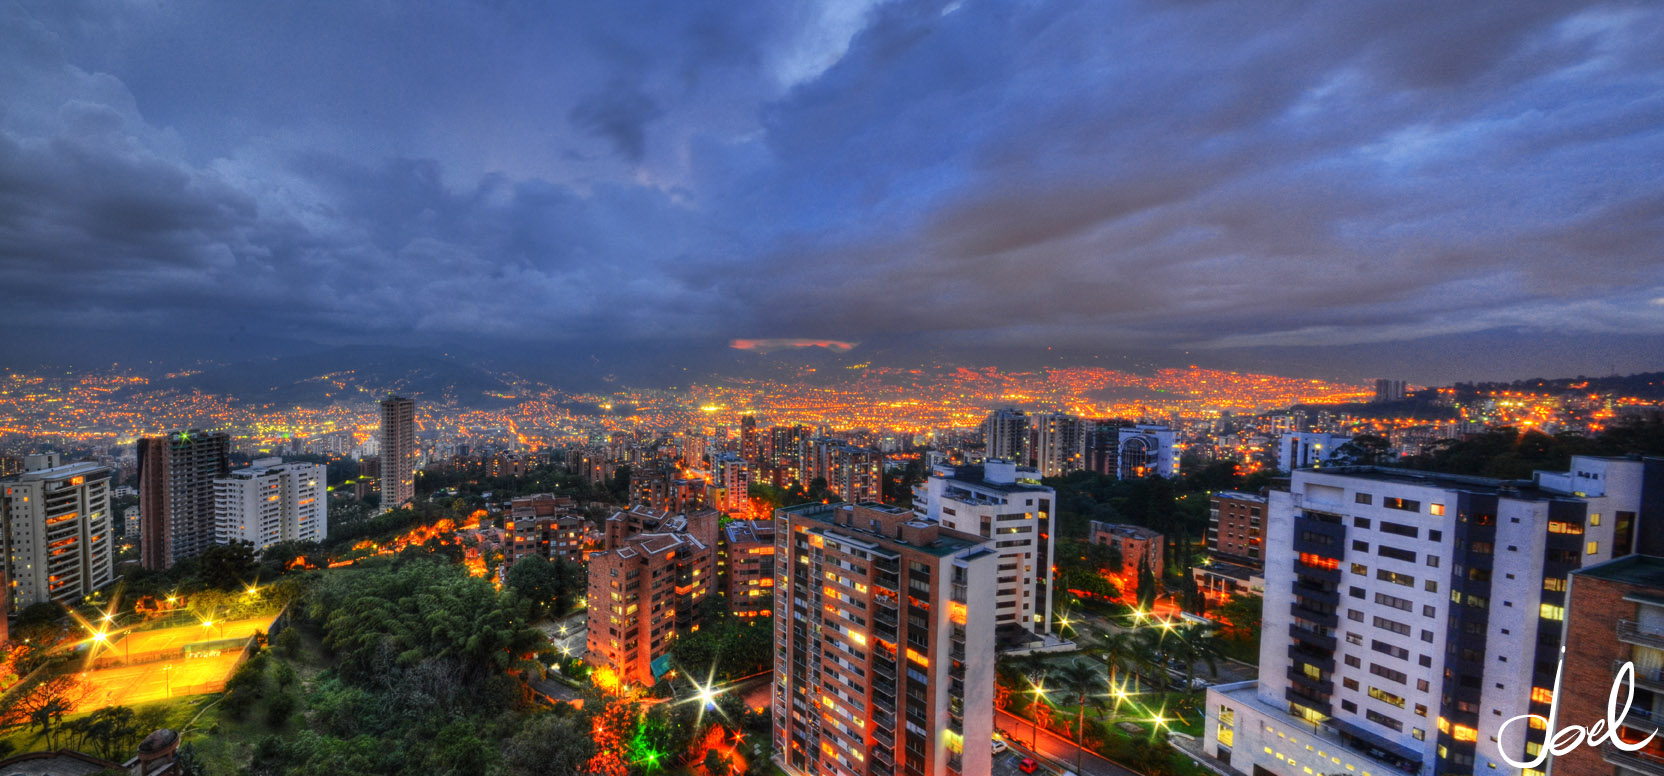 Medellin Photos - The Best Medellin Pictures to Date.